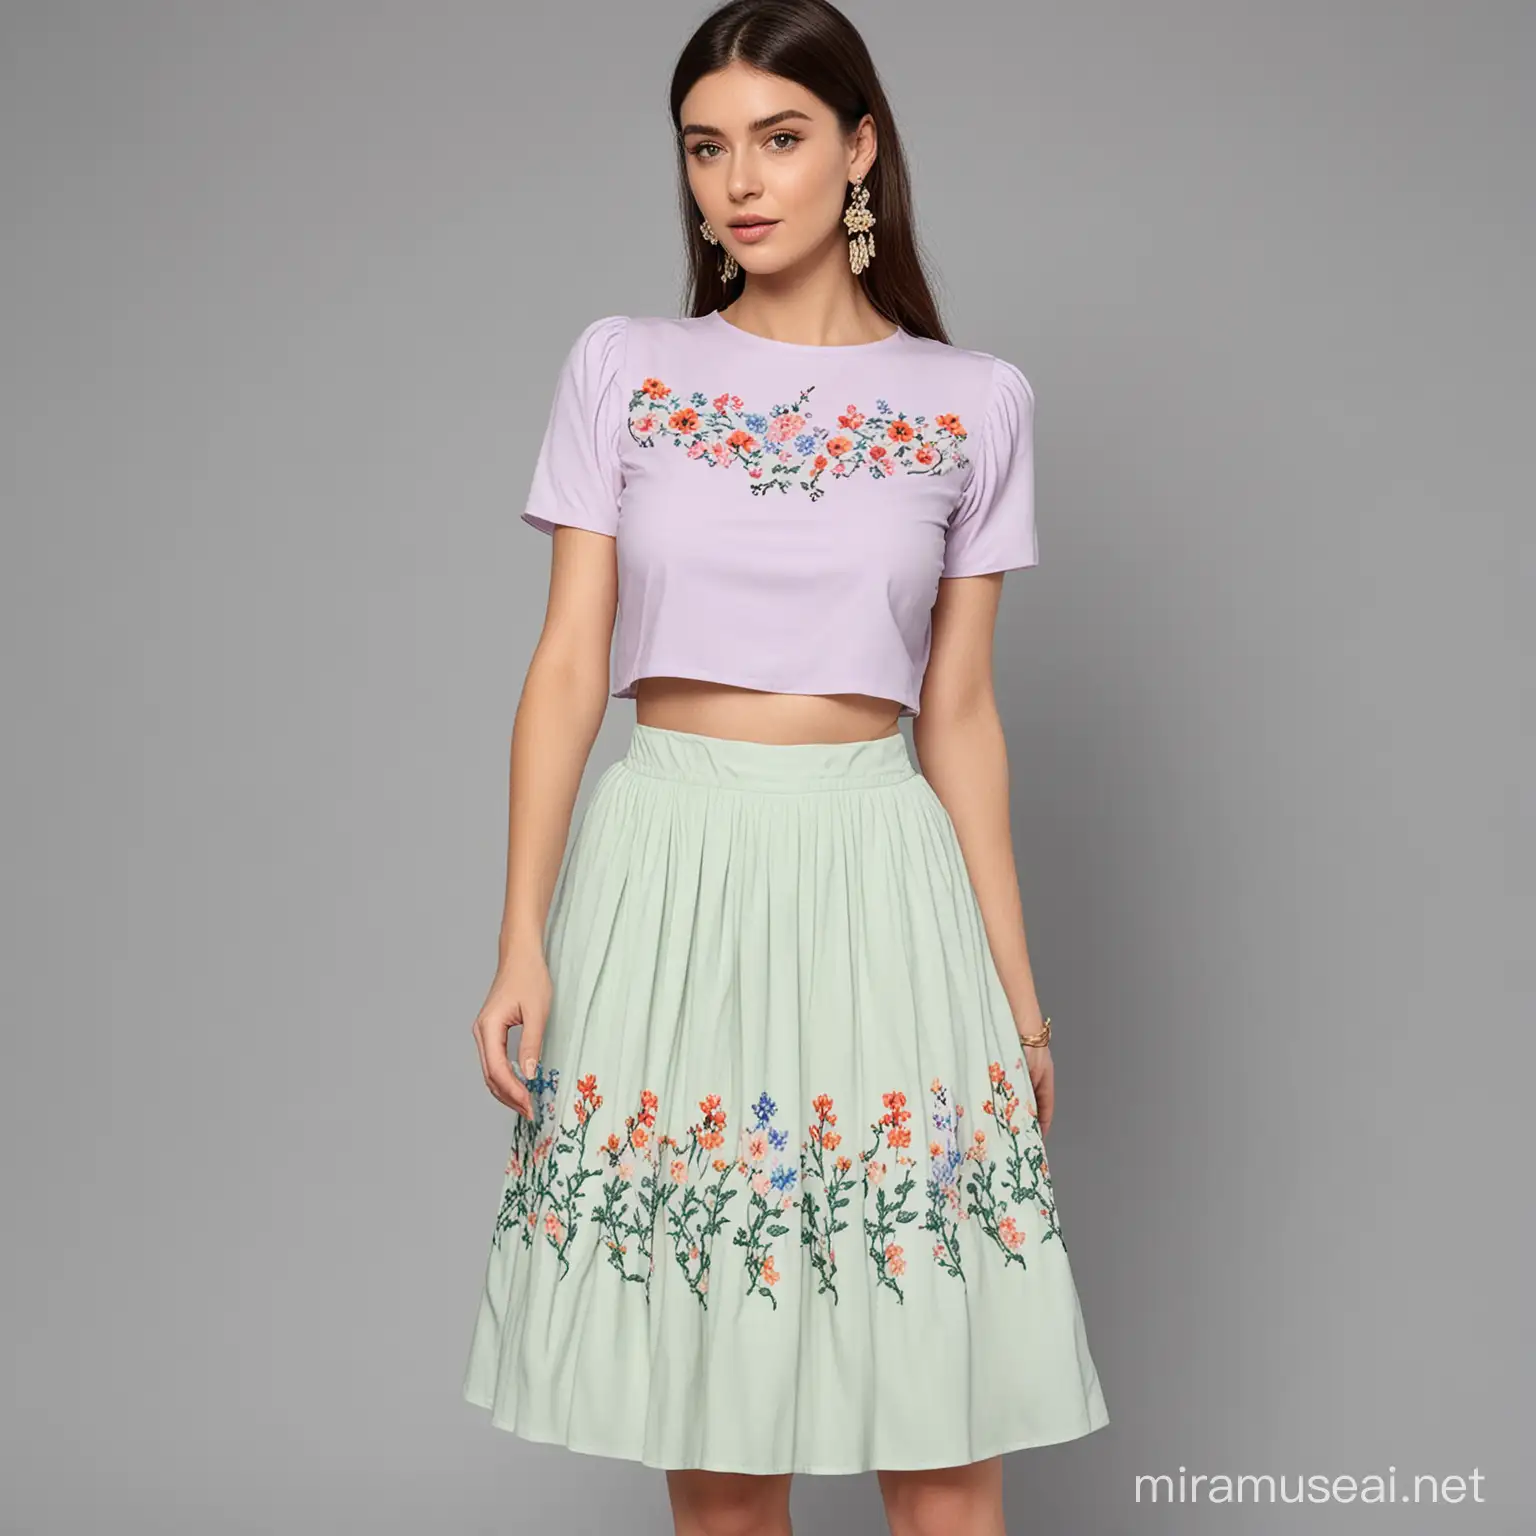 PastelColored Floral Embroidered Womens Skirt and Top Ensemble